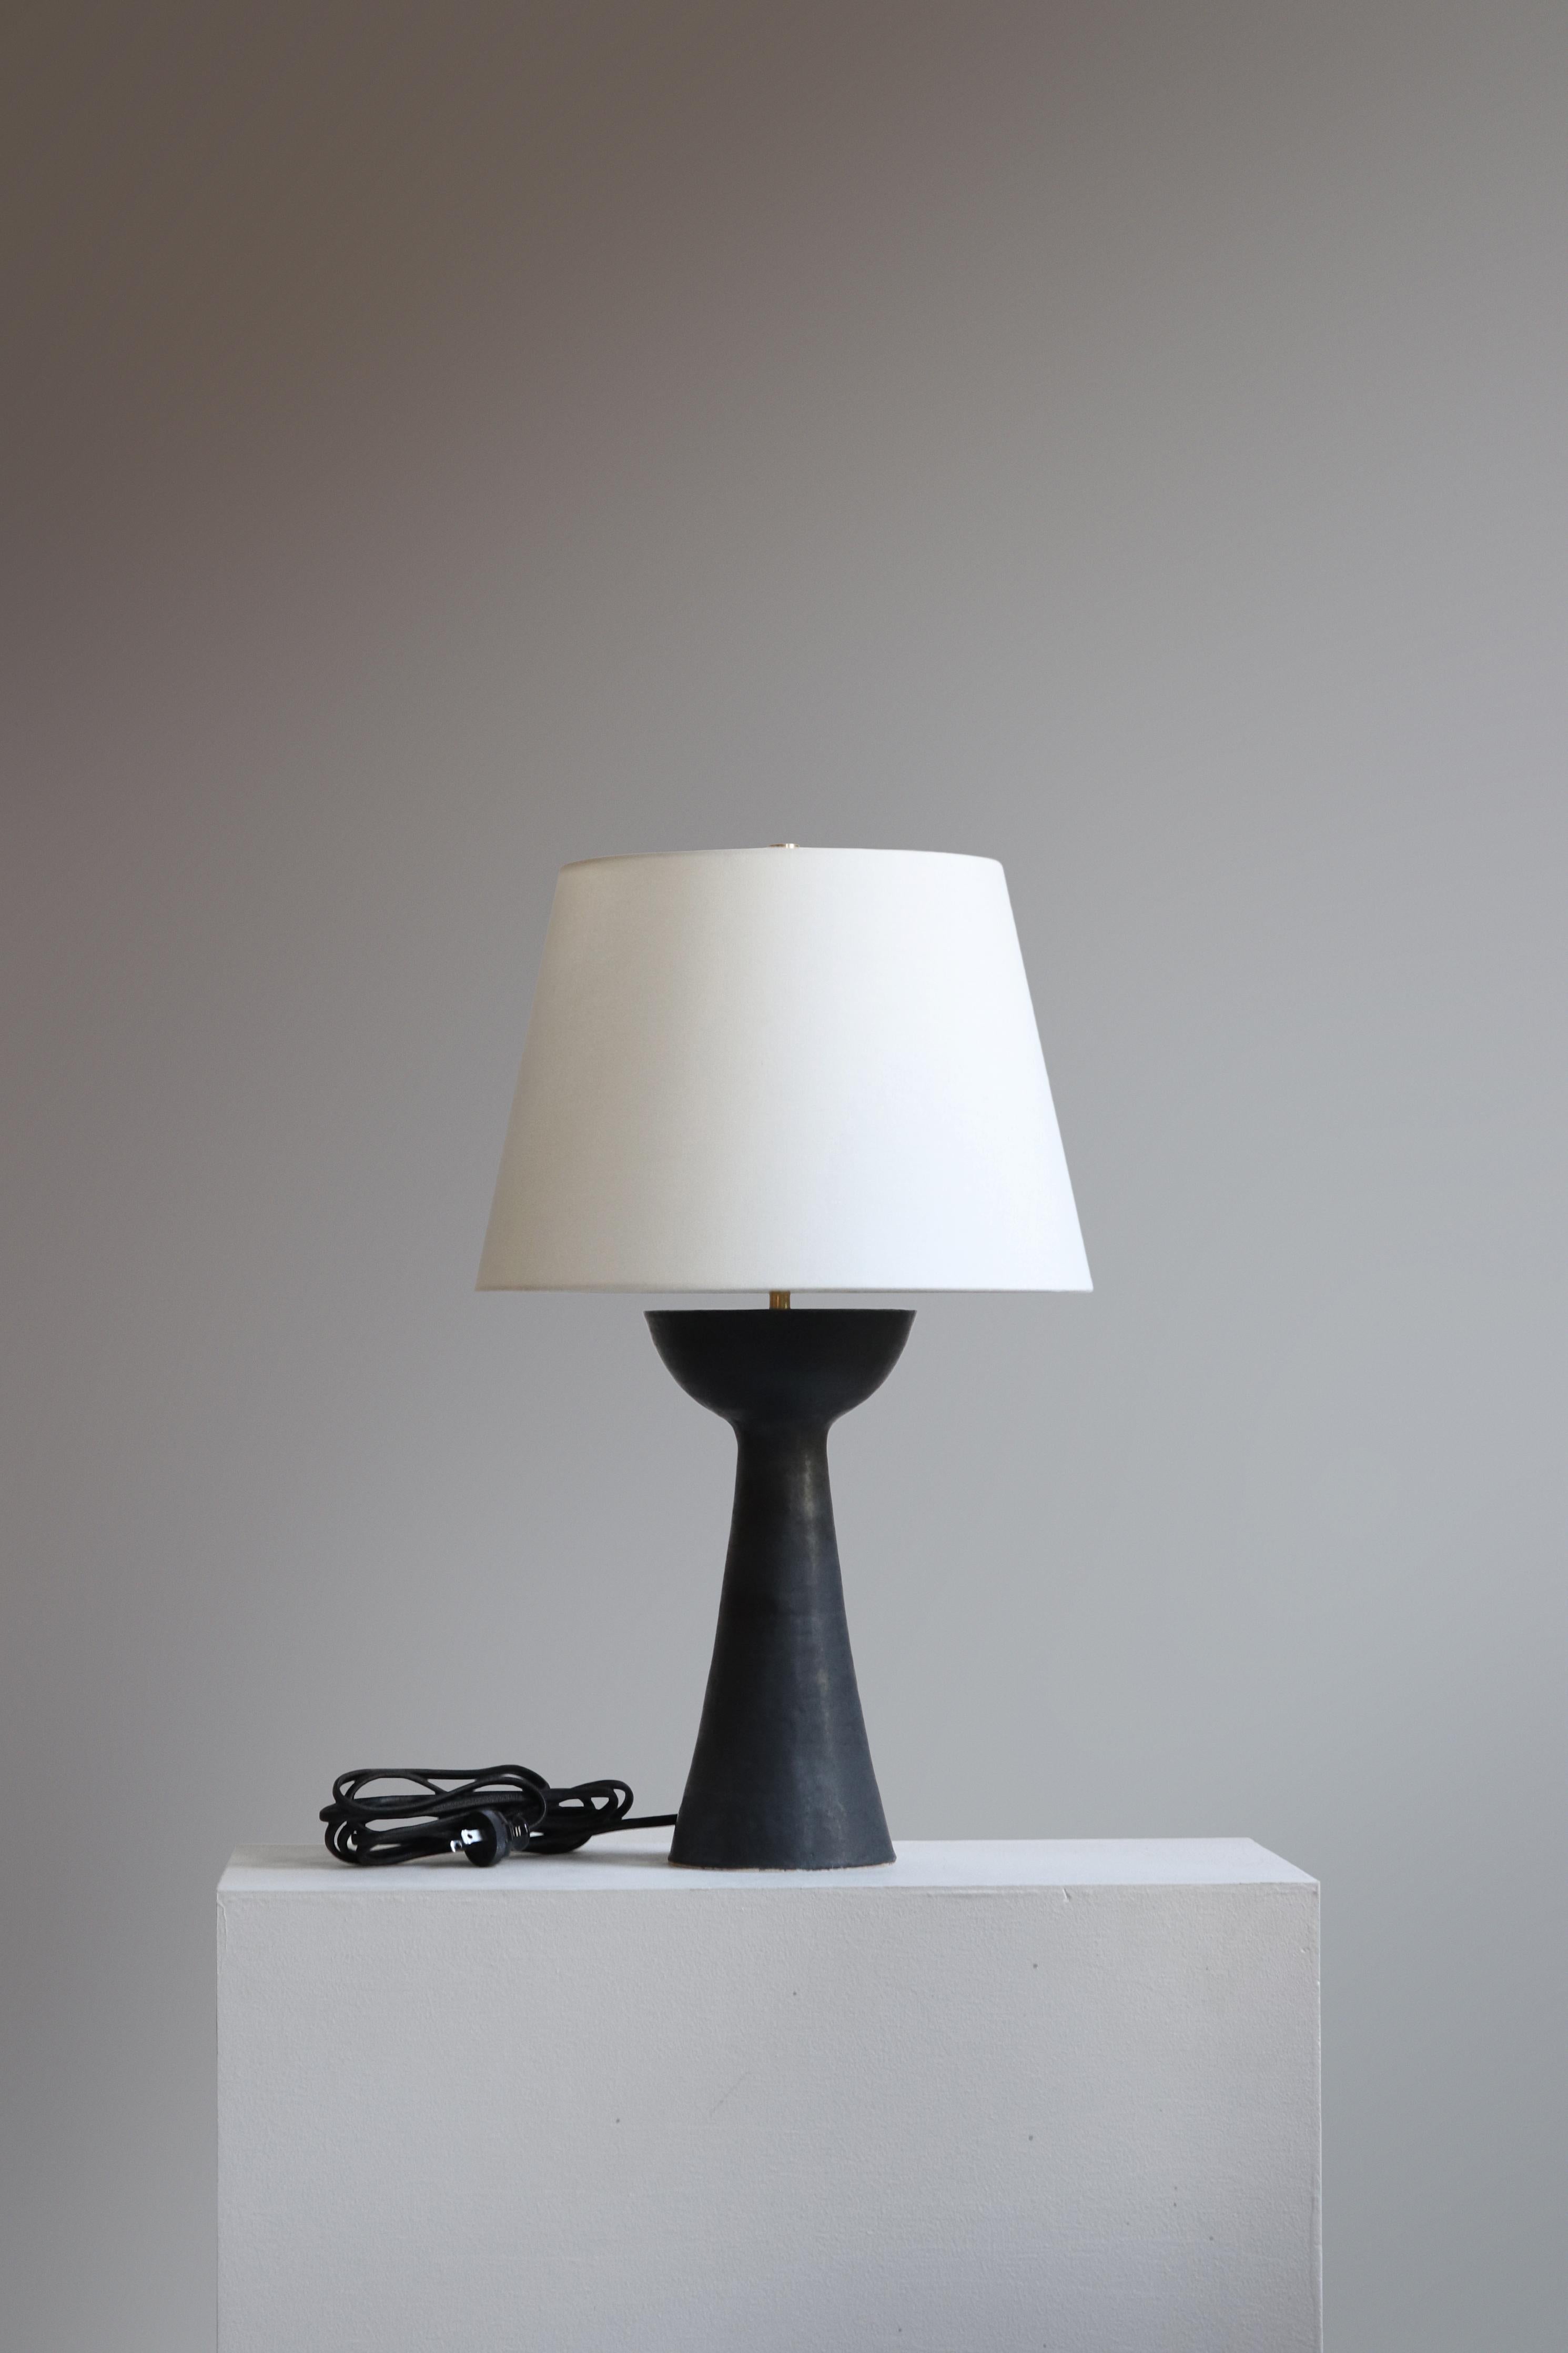 Anthracite Seneca 21 Table Lamp by Danny Kaplan Studio
Dimensions: ⌀ 36 x H 54 cm
Materials: Glazed Ceramic, Unfinished Brass, Linen

This item is handmade, and may exhibit variability within the same piece. We do our best to maintain a consistent